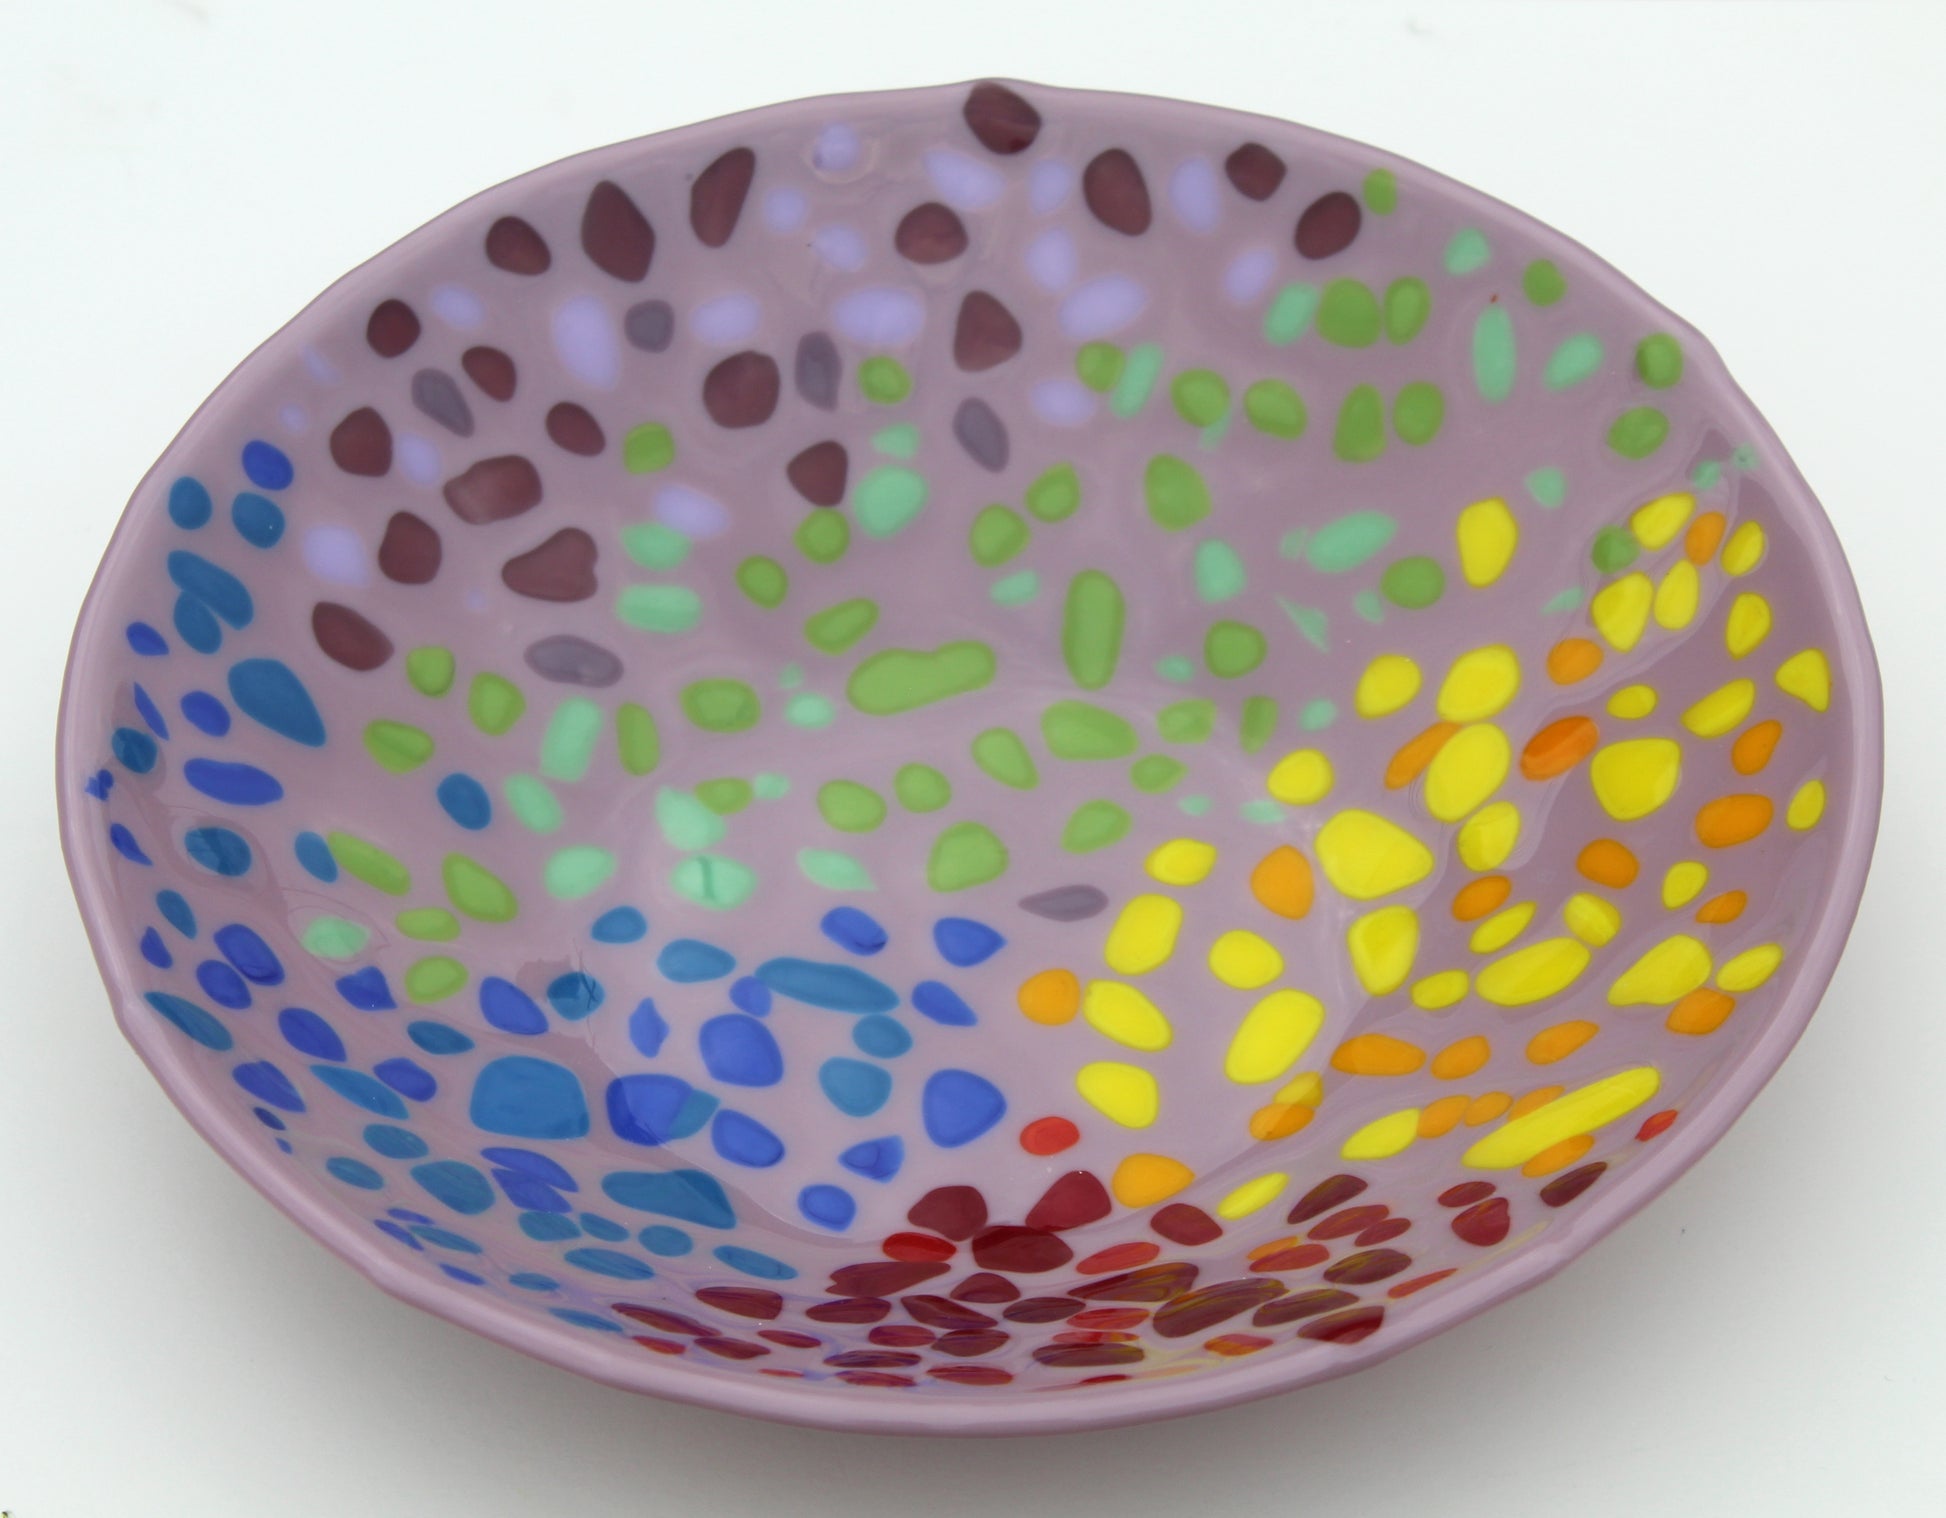 purple glass bowl with spots of red, yellow, green, and blue sectioned off